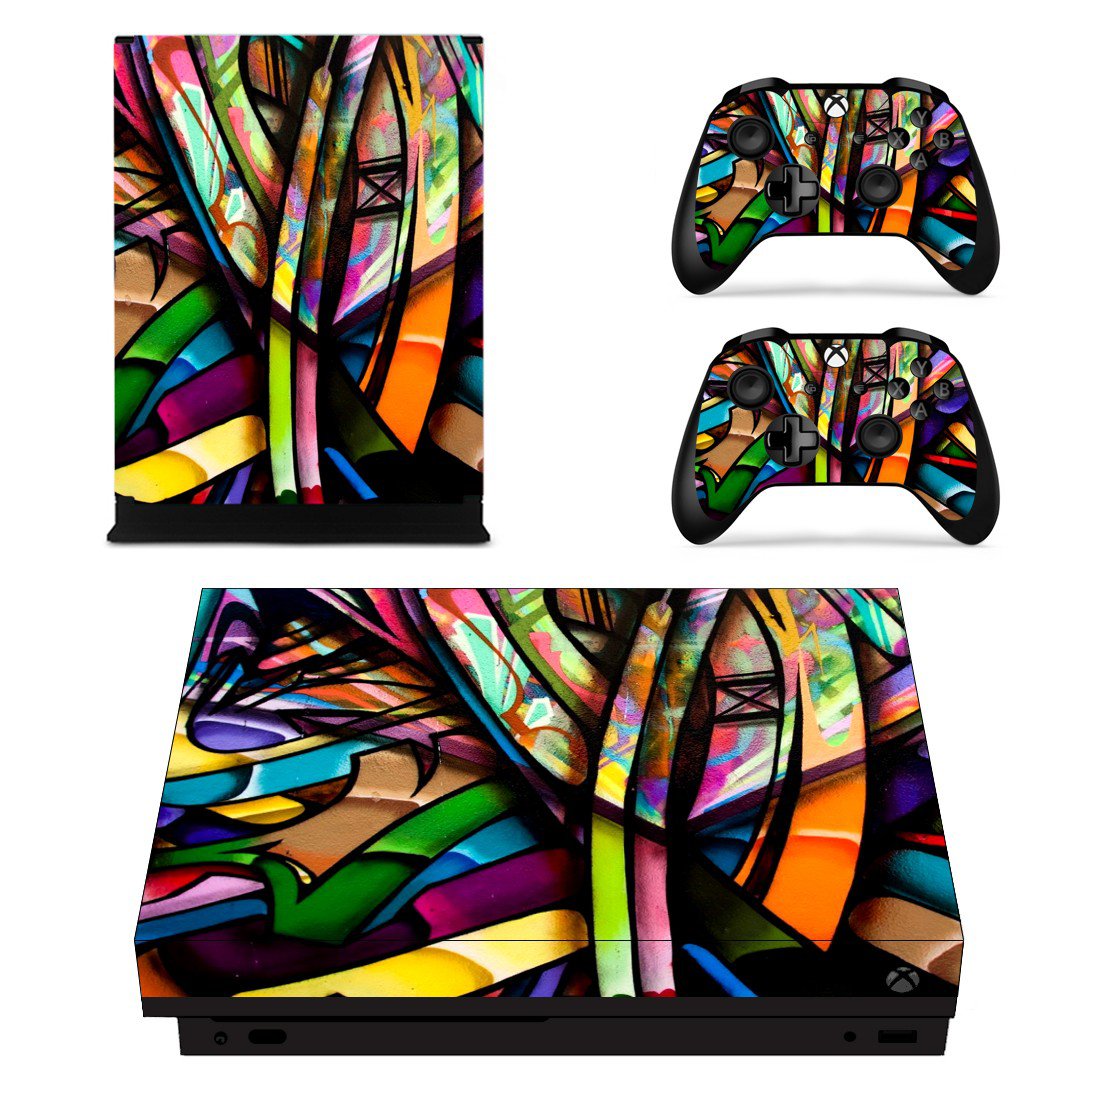 Anime Xbox One X Skin Decal For Console And 2 Controllers